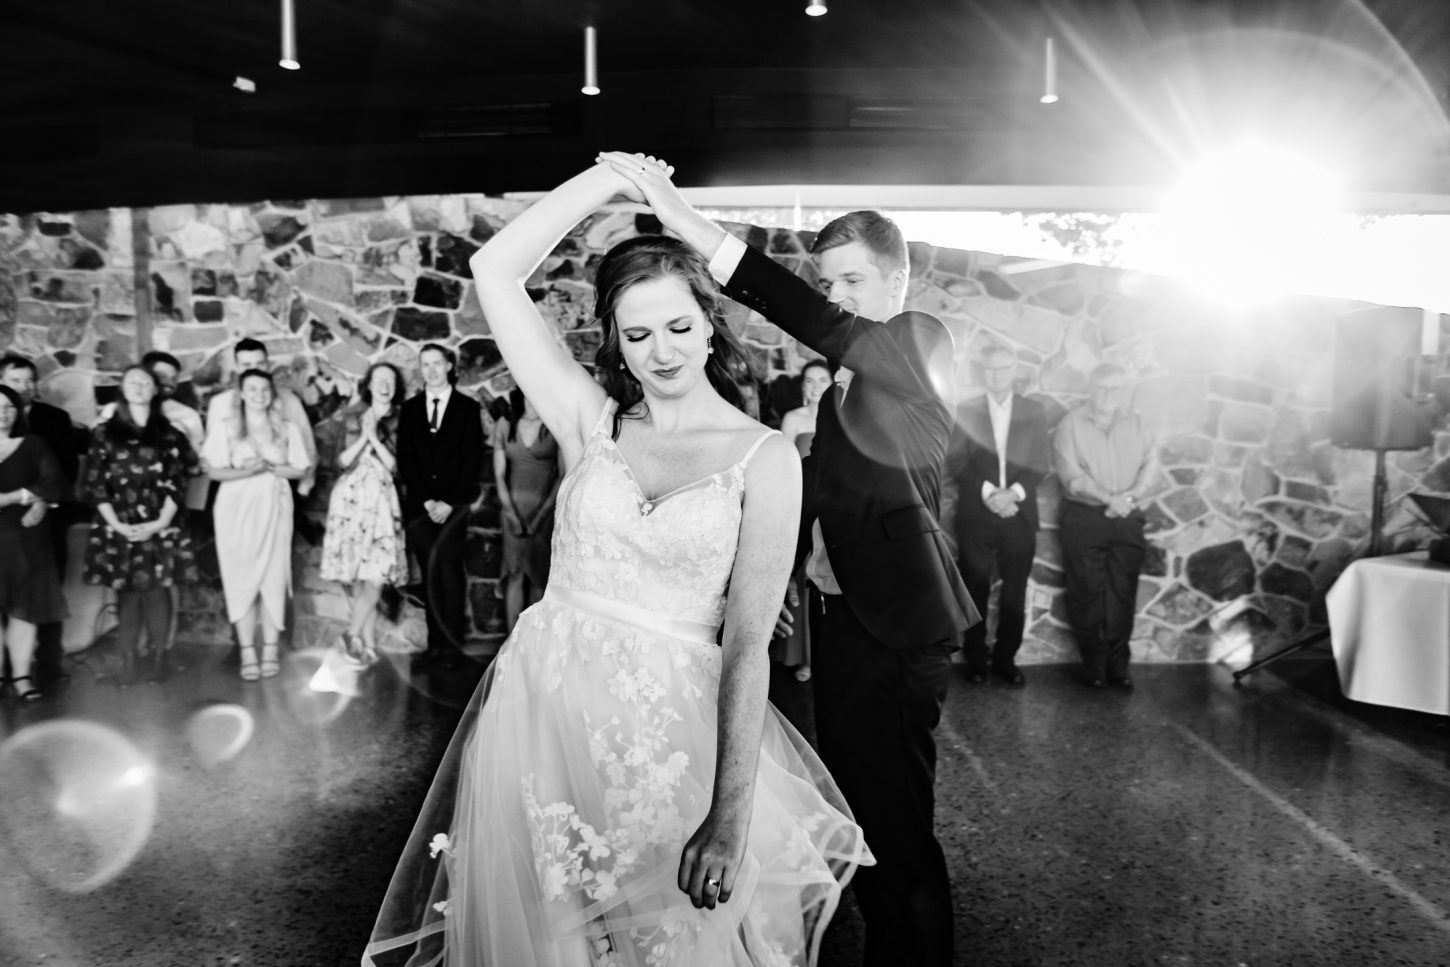 Wedding Photo of Natalie & Linden during their first dance at Vines of the Yarra Valley